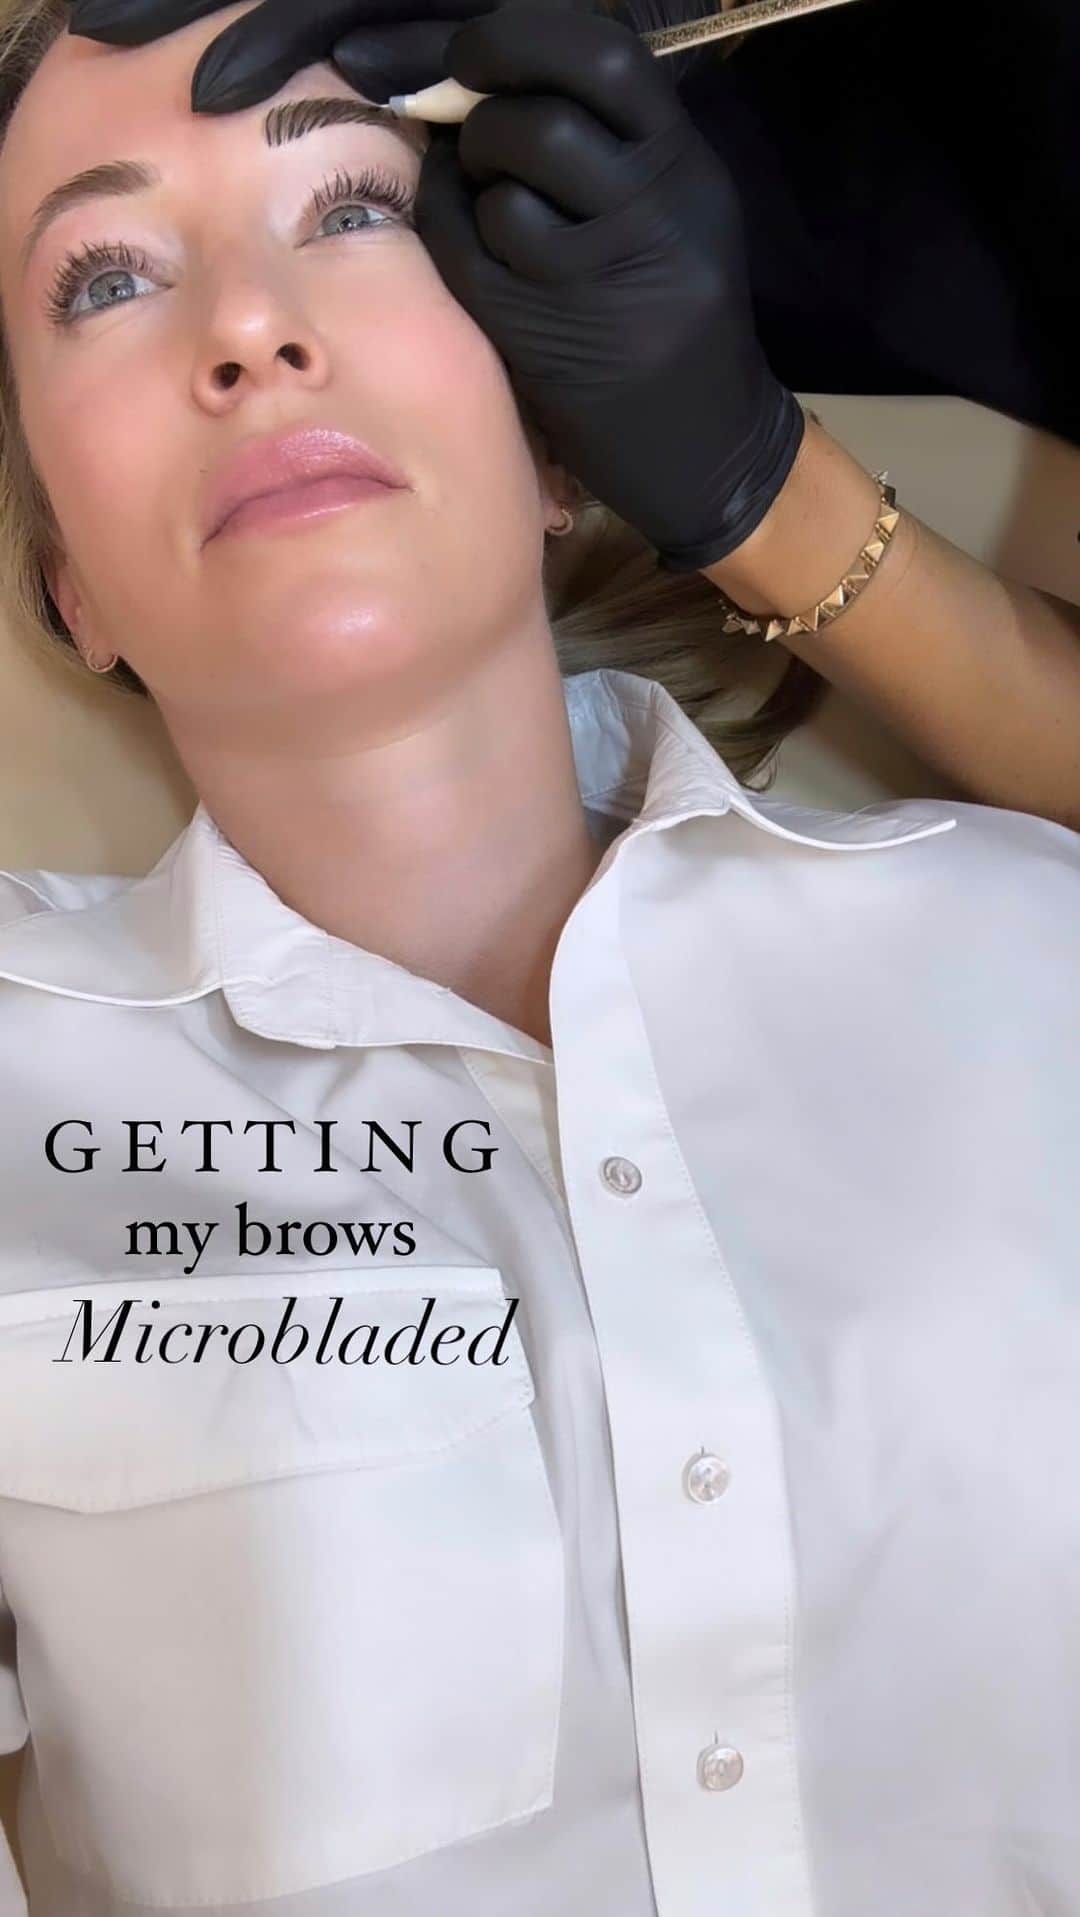 Helena Glazer Hodneのインスタグラム：「It's been a few weeks since I got my brows #microbladed back Piret aka the @eyebrowdoctor and as always, I am always thrilled with what she does. I don't have great brows to begin with, but she manages to make me feel a bit more put together and finished. For those not in NYC, she also has locations in Miami and LA.」